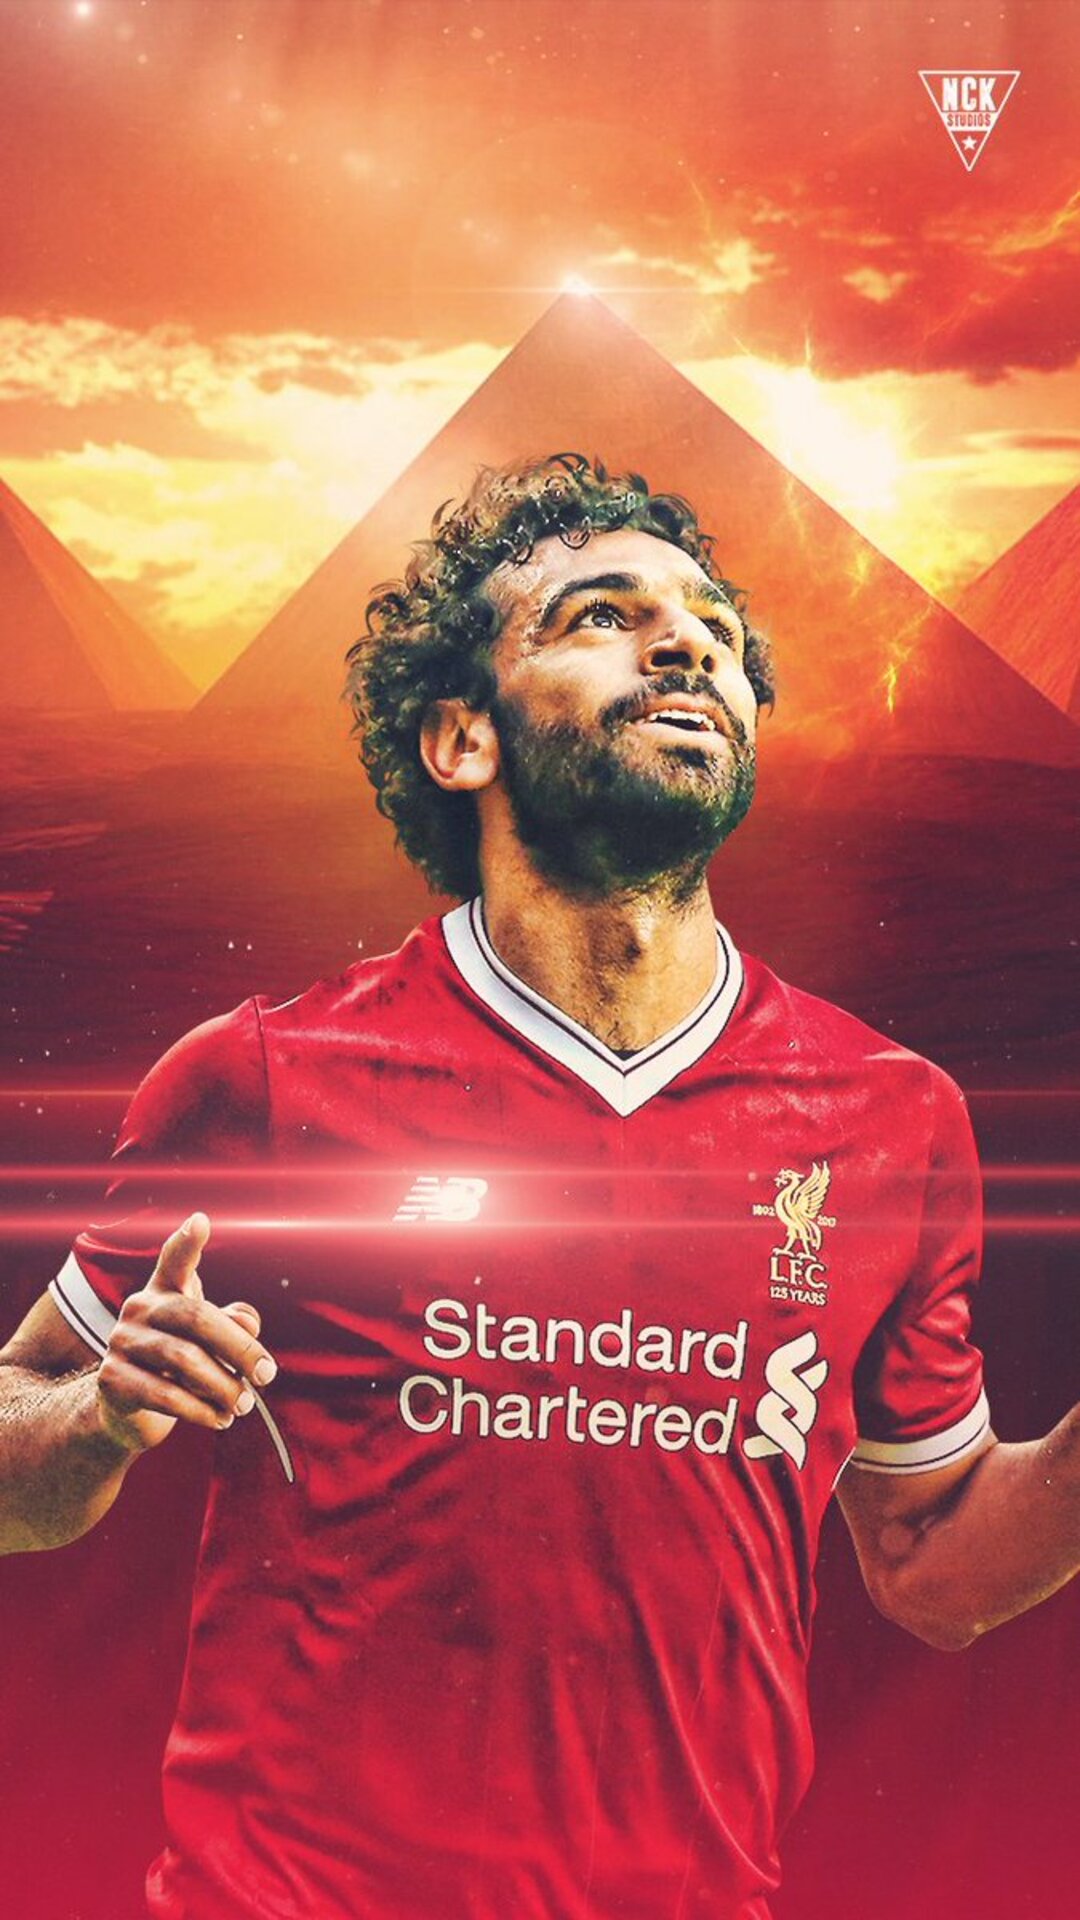 D8AD D8ACD988D8AFD8A9 D8B9D8A7D984D98AD8A9 Mohamed Salah Wallpapers HD 2020 4